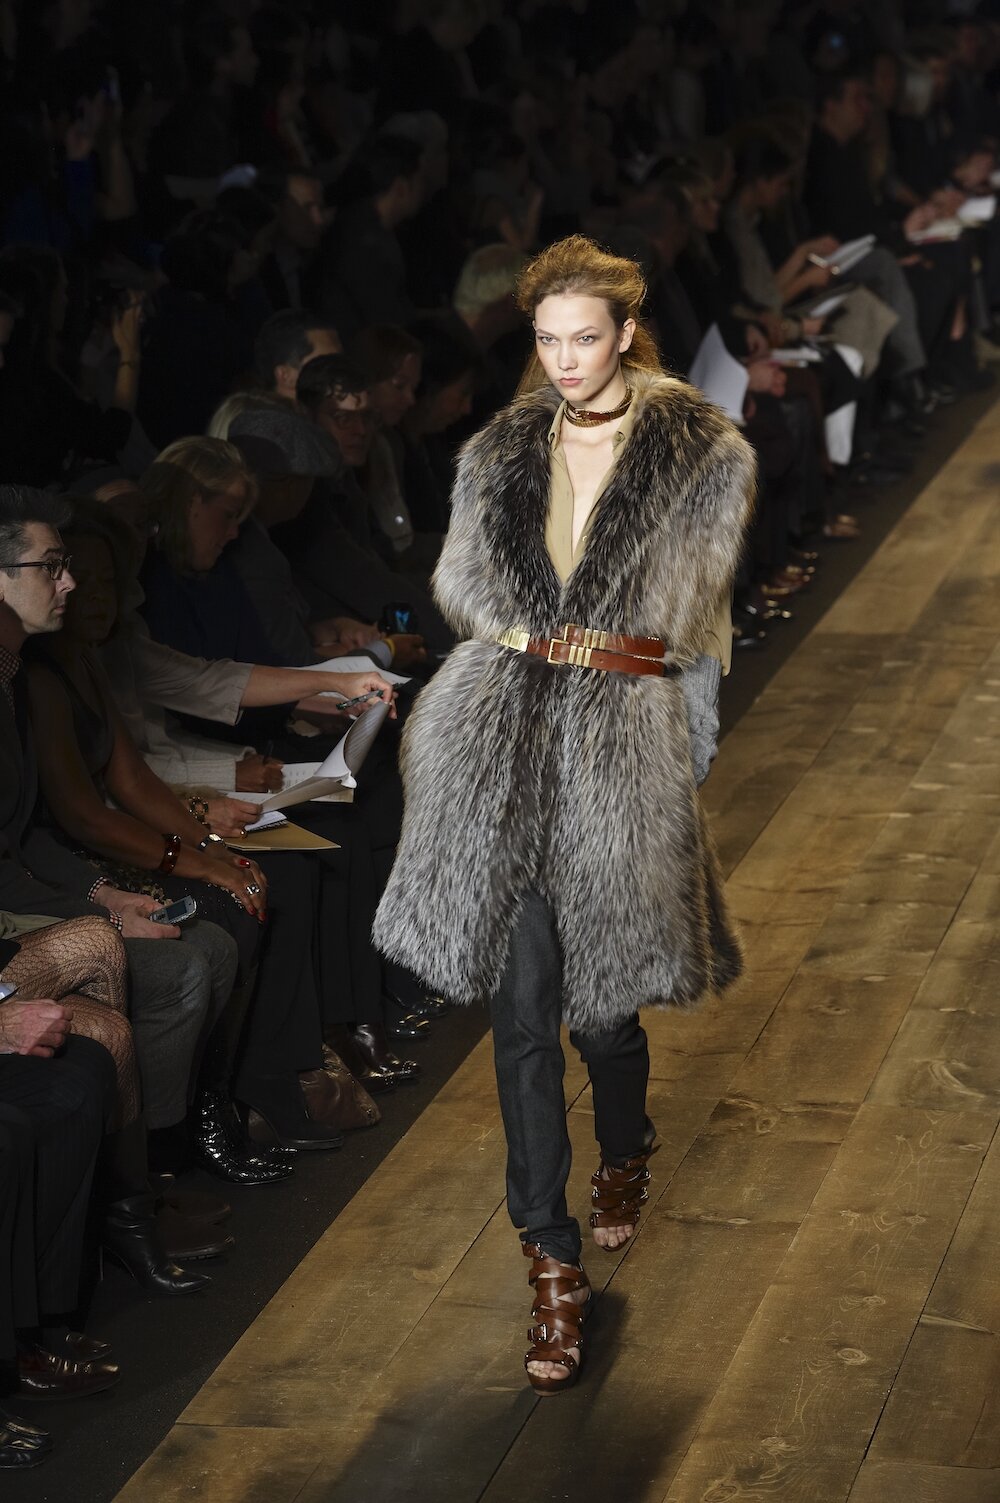 Luxury Fashion House Kering Bans Fur Across All Its Brands Including Gucci  and Saint Laurent — Species Unite